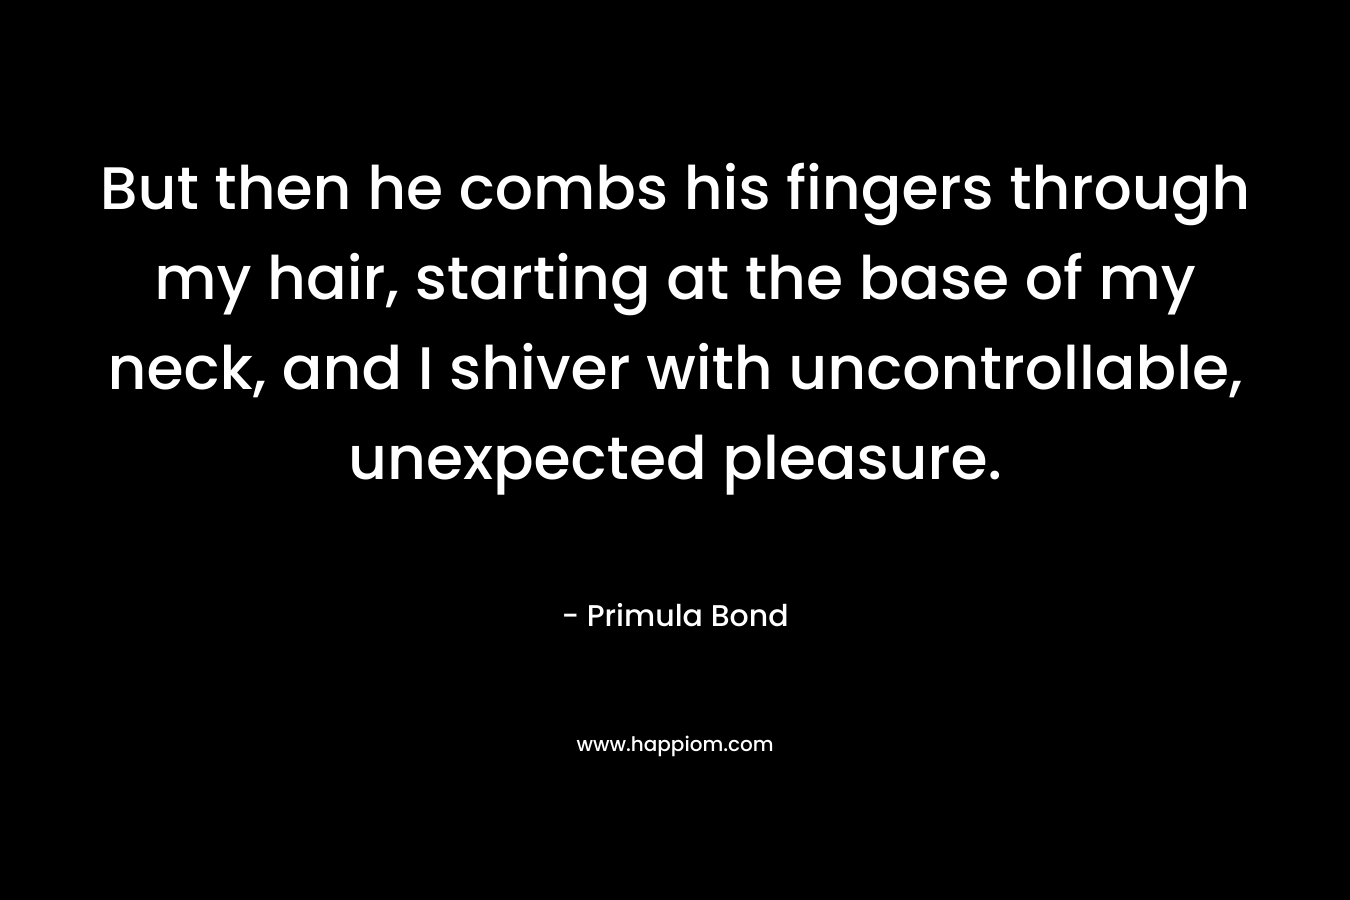 But then he combs his fingers through my hair, starting at the base of my neck, and I shiver with uncontrollable, unexpected pleasure. – Primula Bond